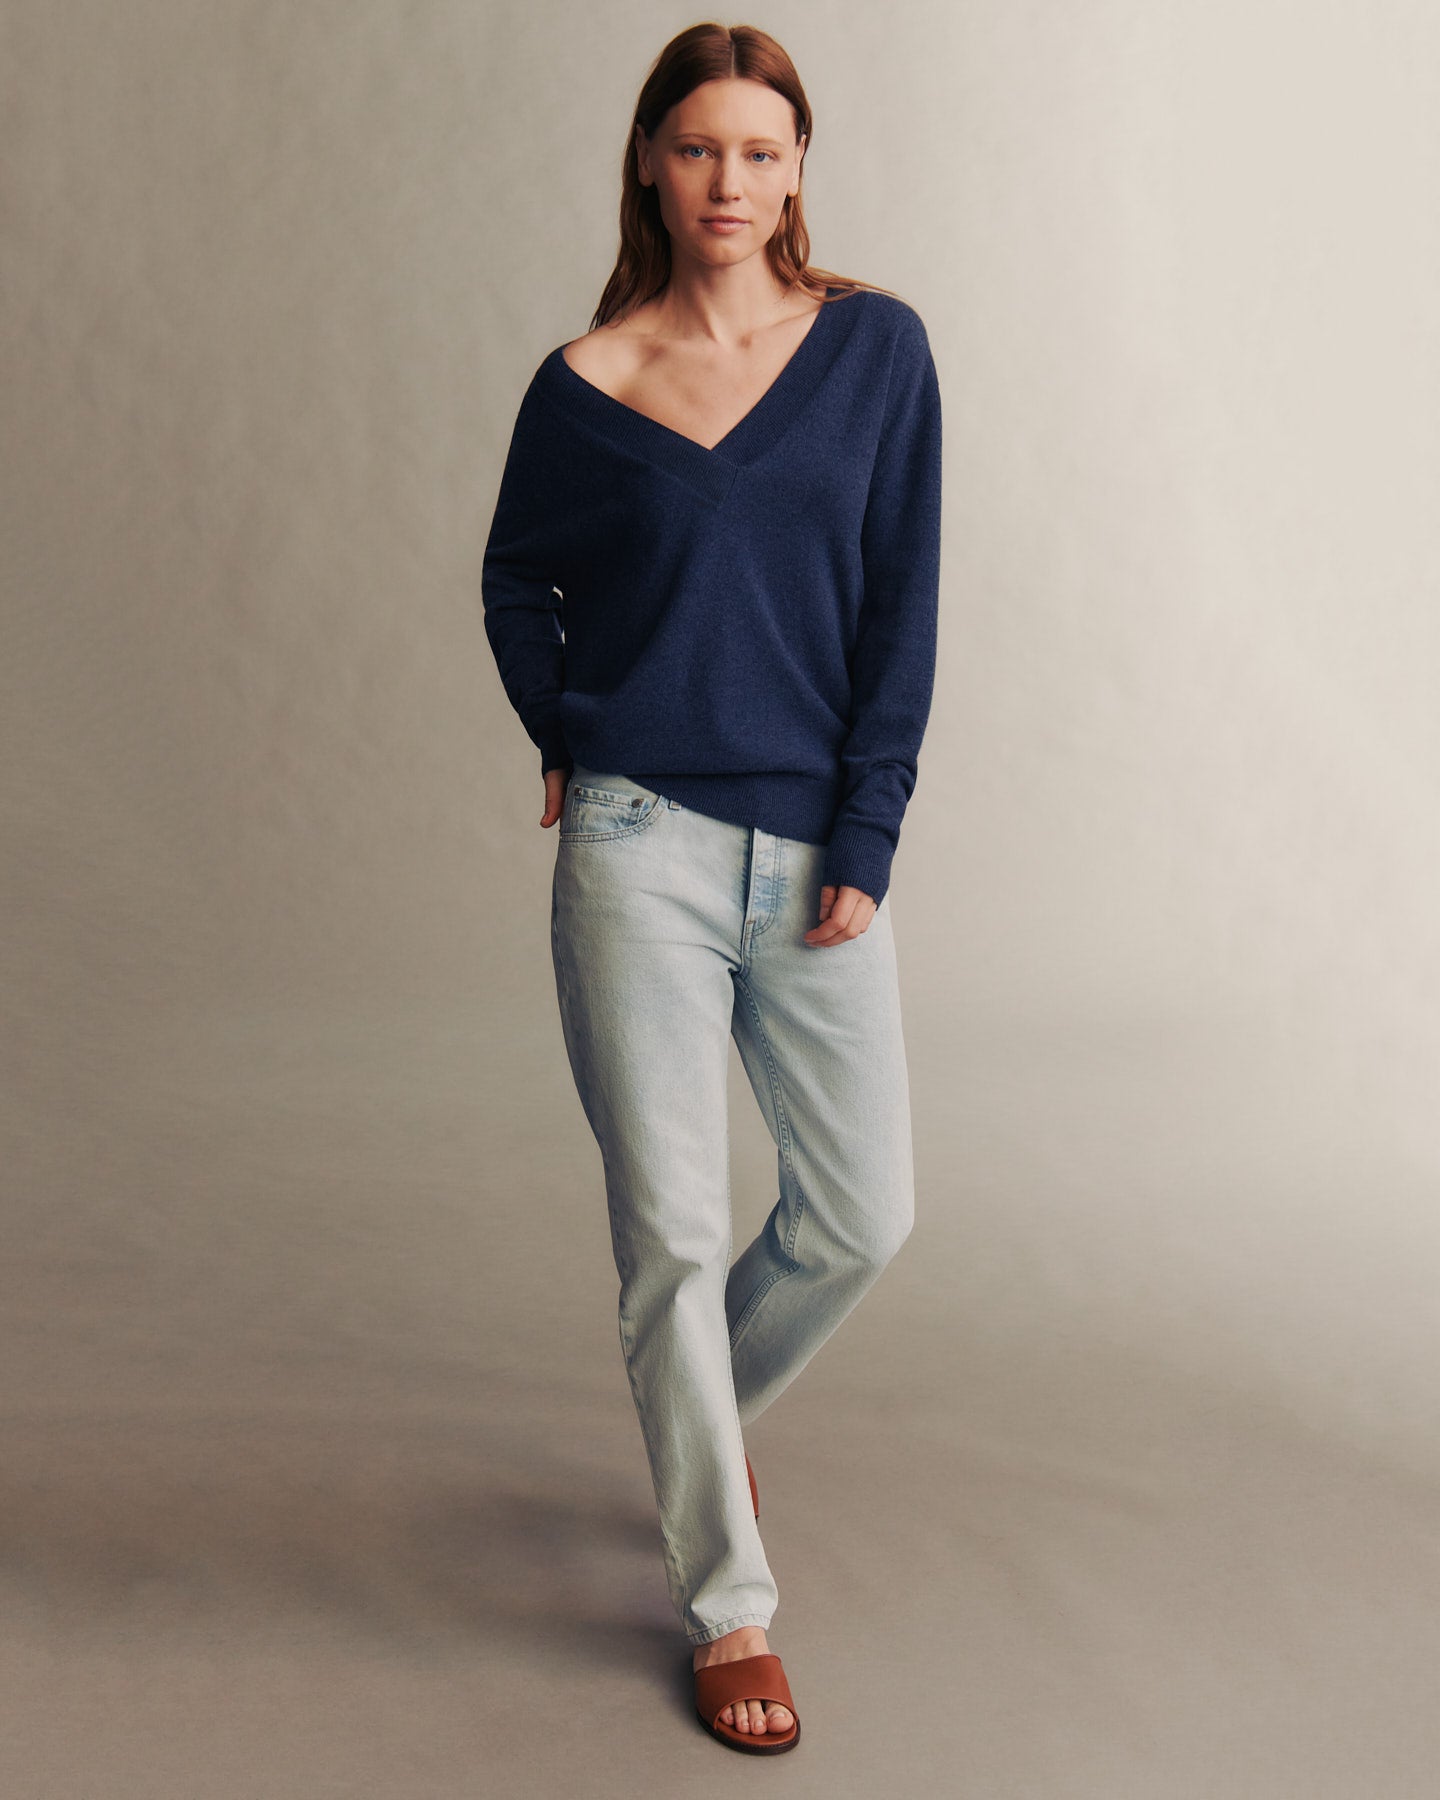 TWP Indigo Deep V Sweater in Cashmere view 2